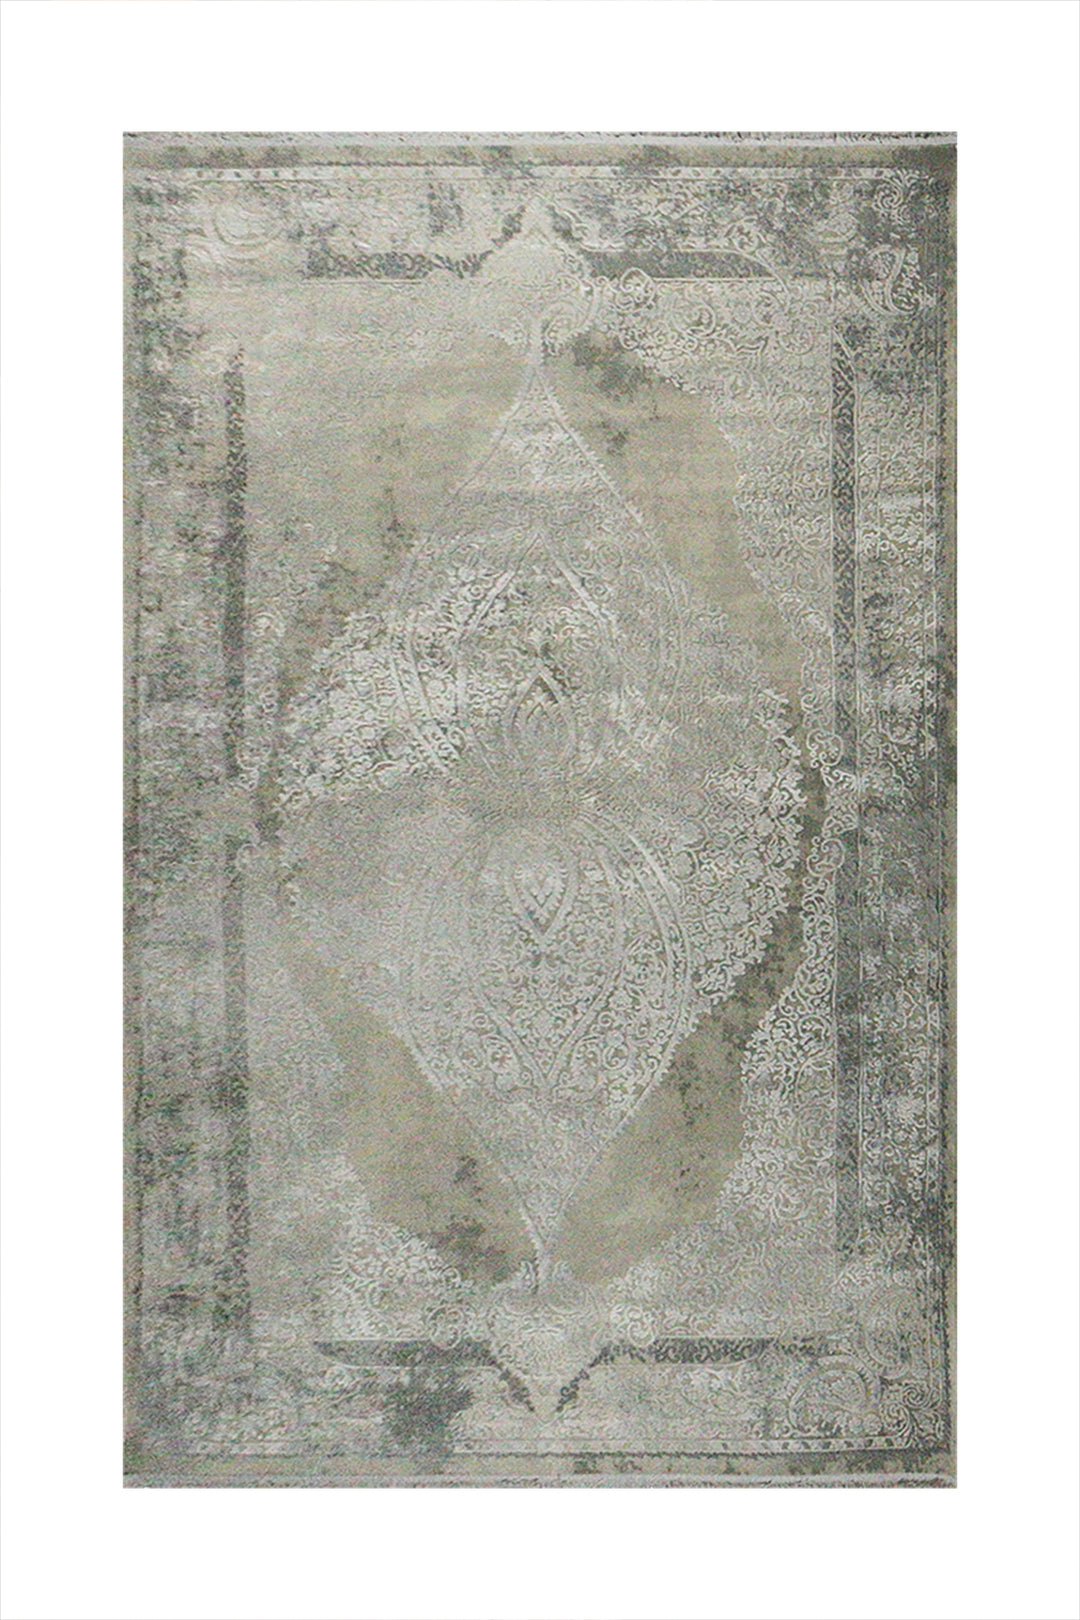 Turkish Premium Quality Sunrise Rug - 6.5 x 9.5 FT - Gray - Resilient Construction for Long-Lasting Use